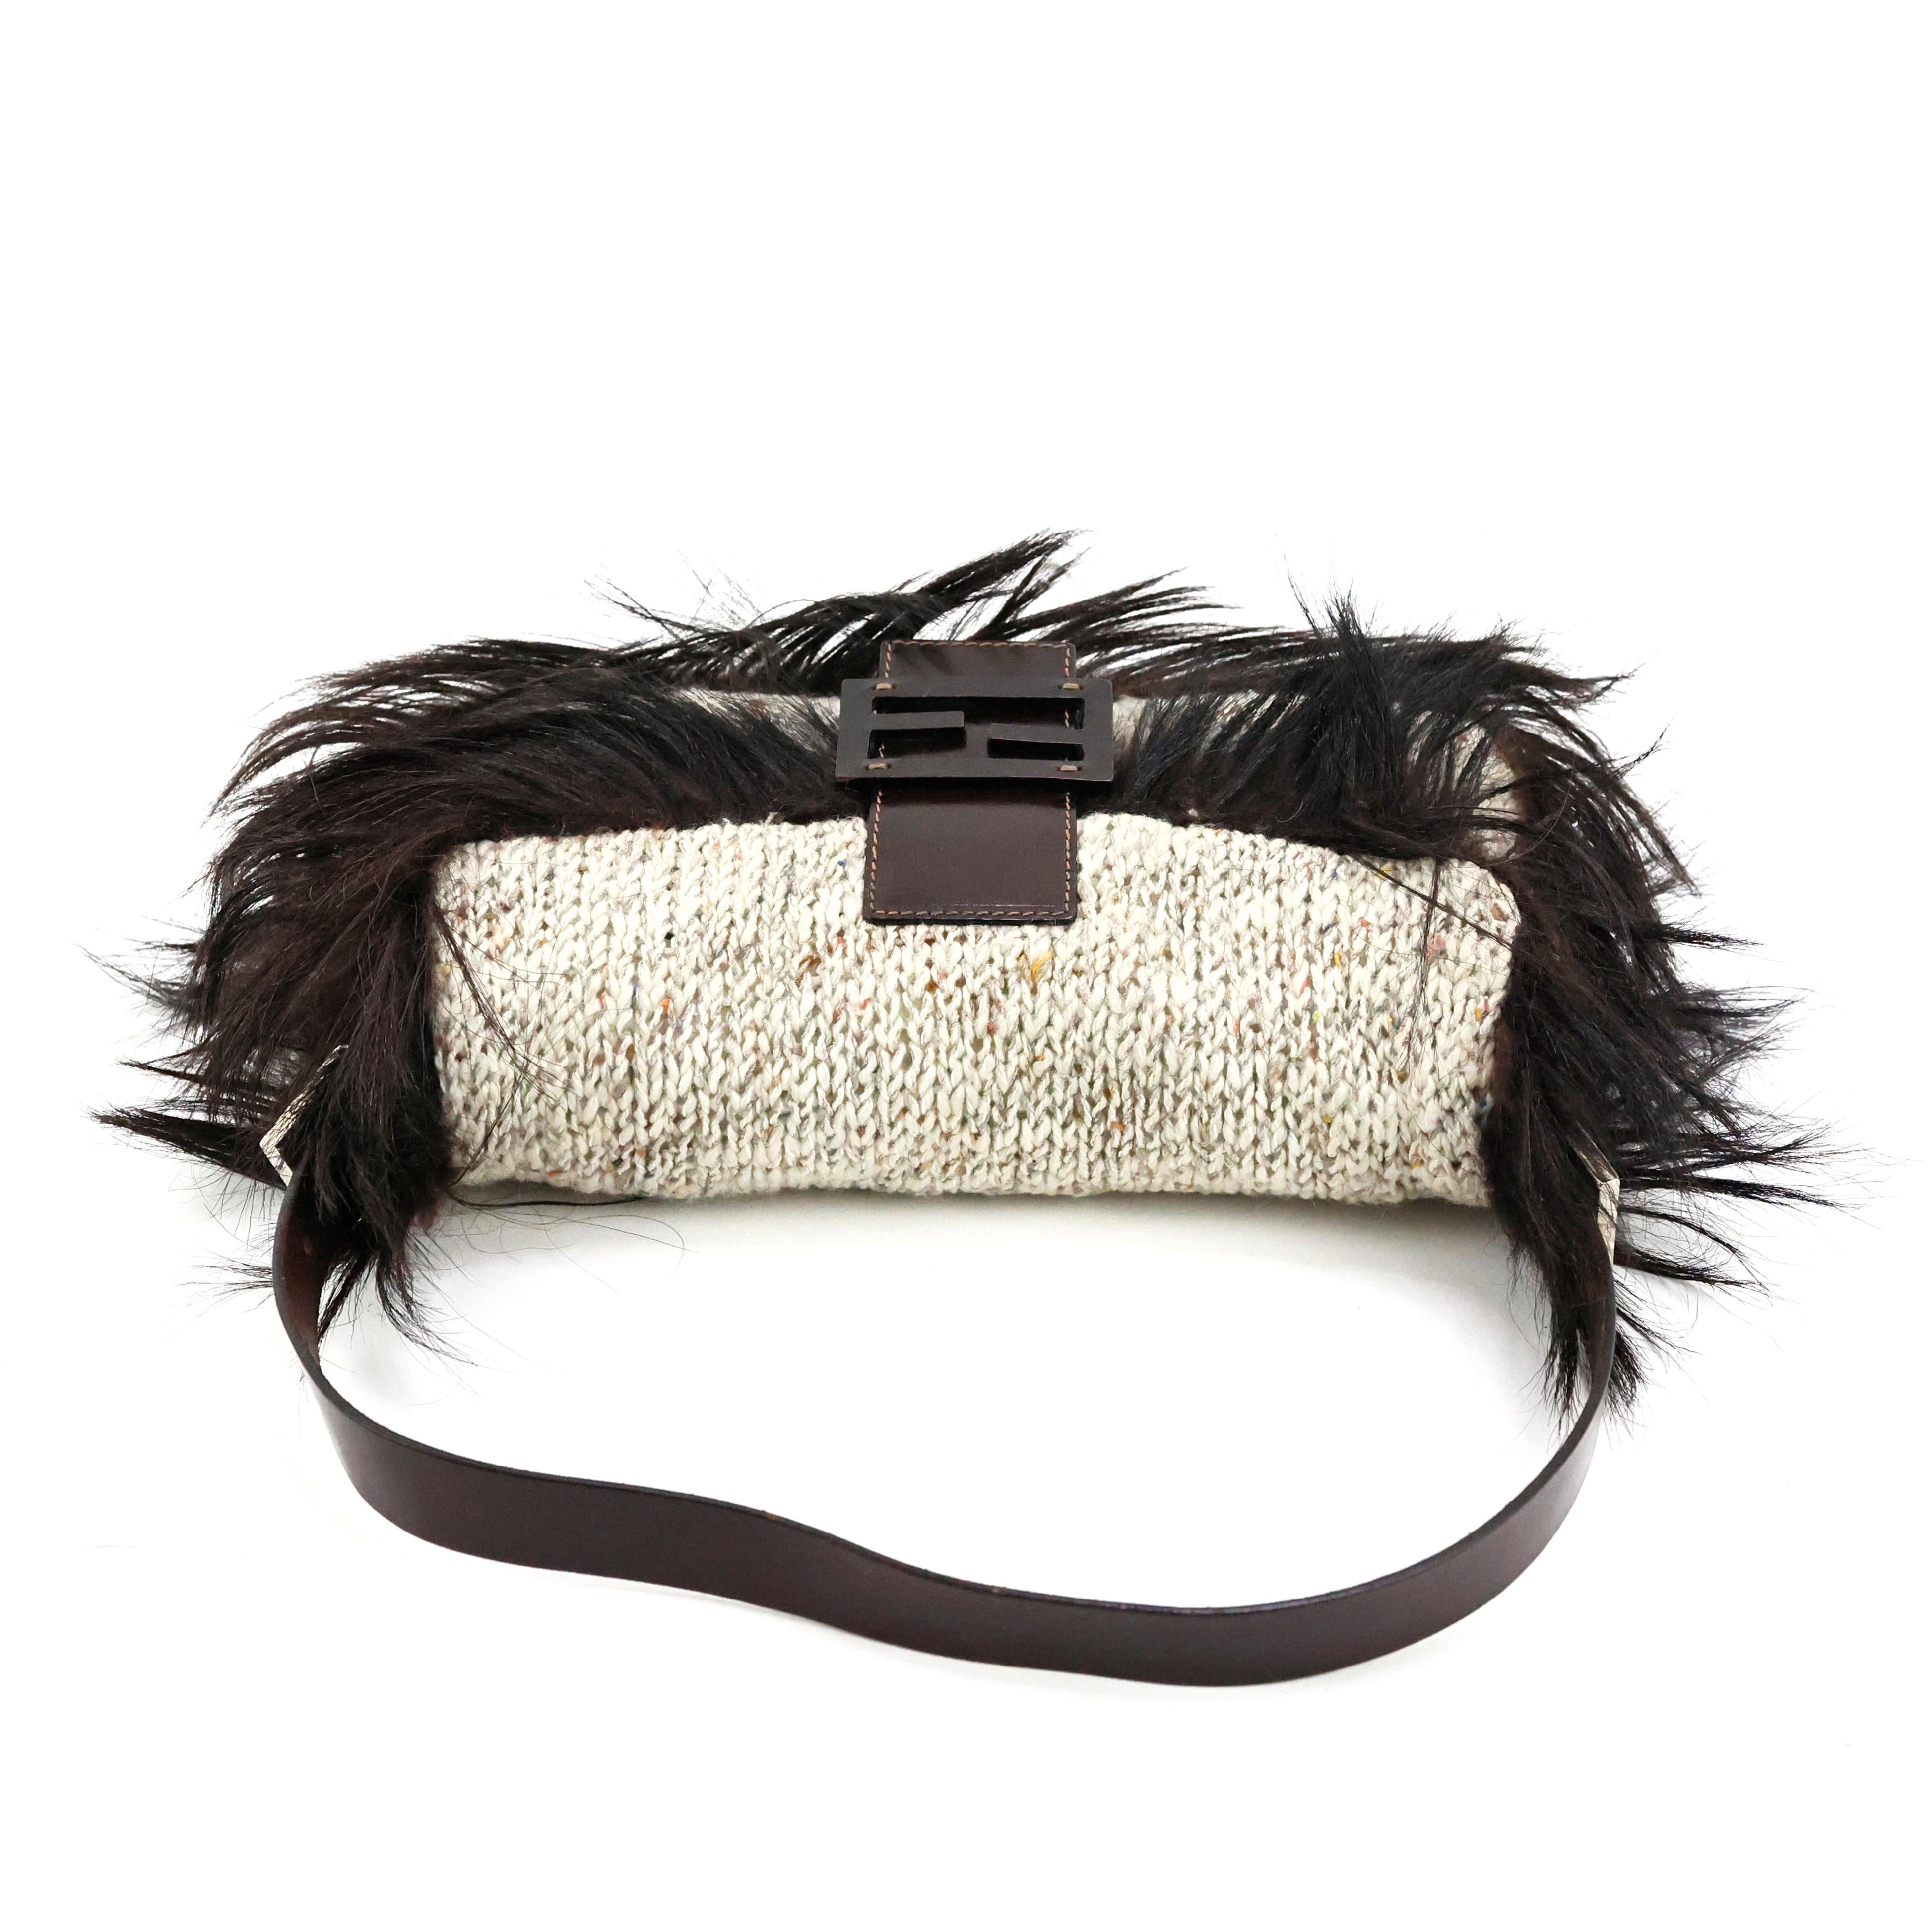 Fendi Knitted Baguette with Fur For Sale 3